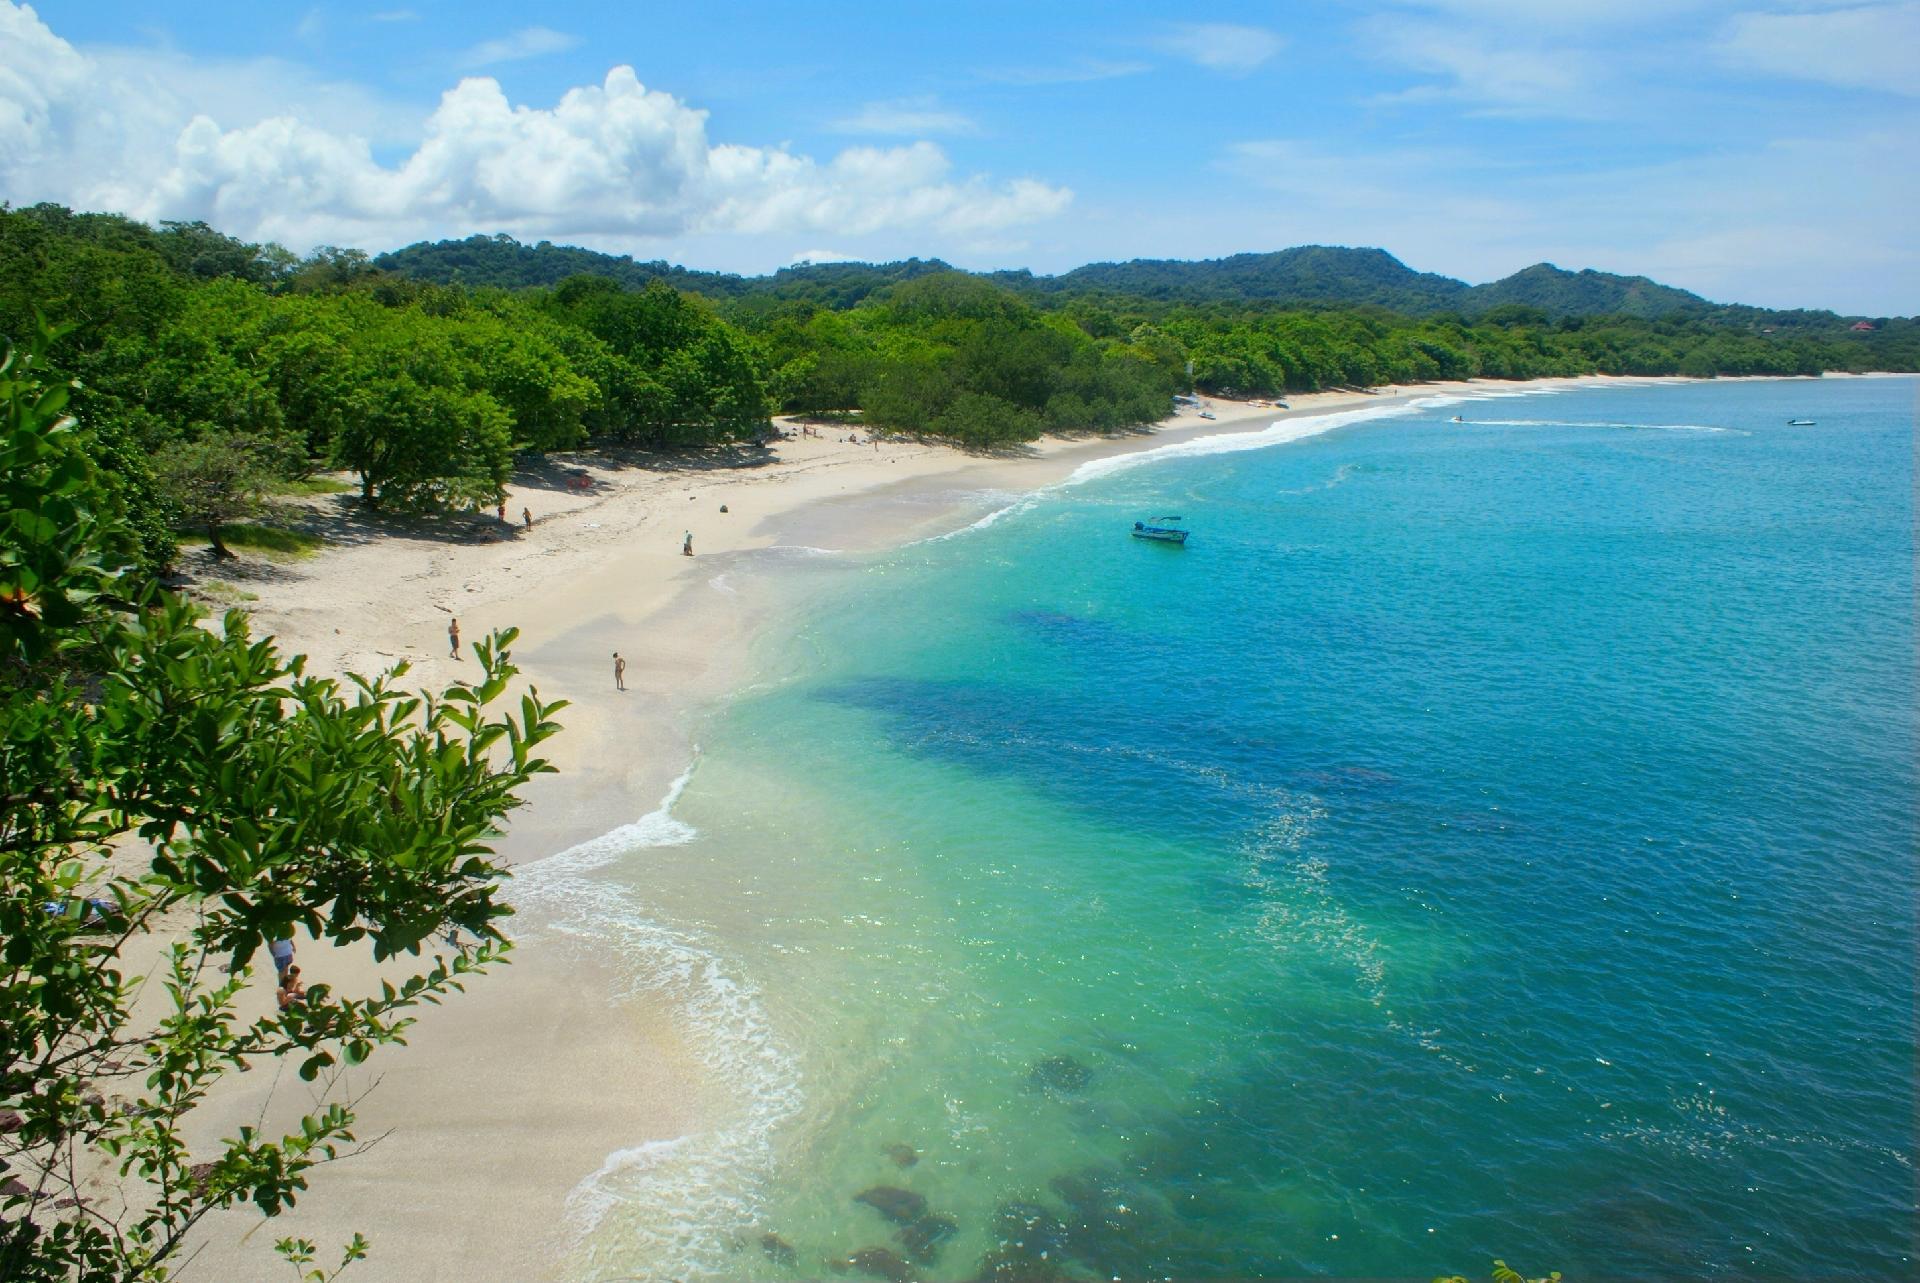 Playa Conchal, Guanacaste, Costa Rica - TG23/Getty Images/iStockphoto